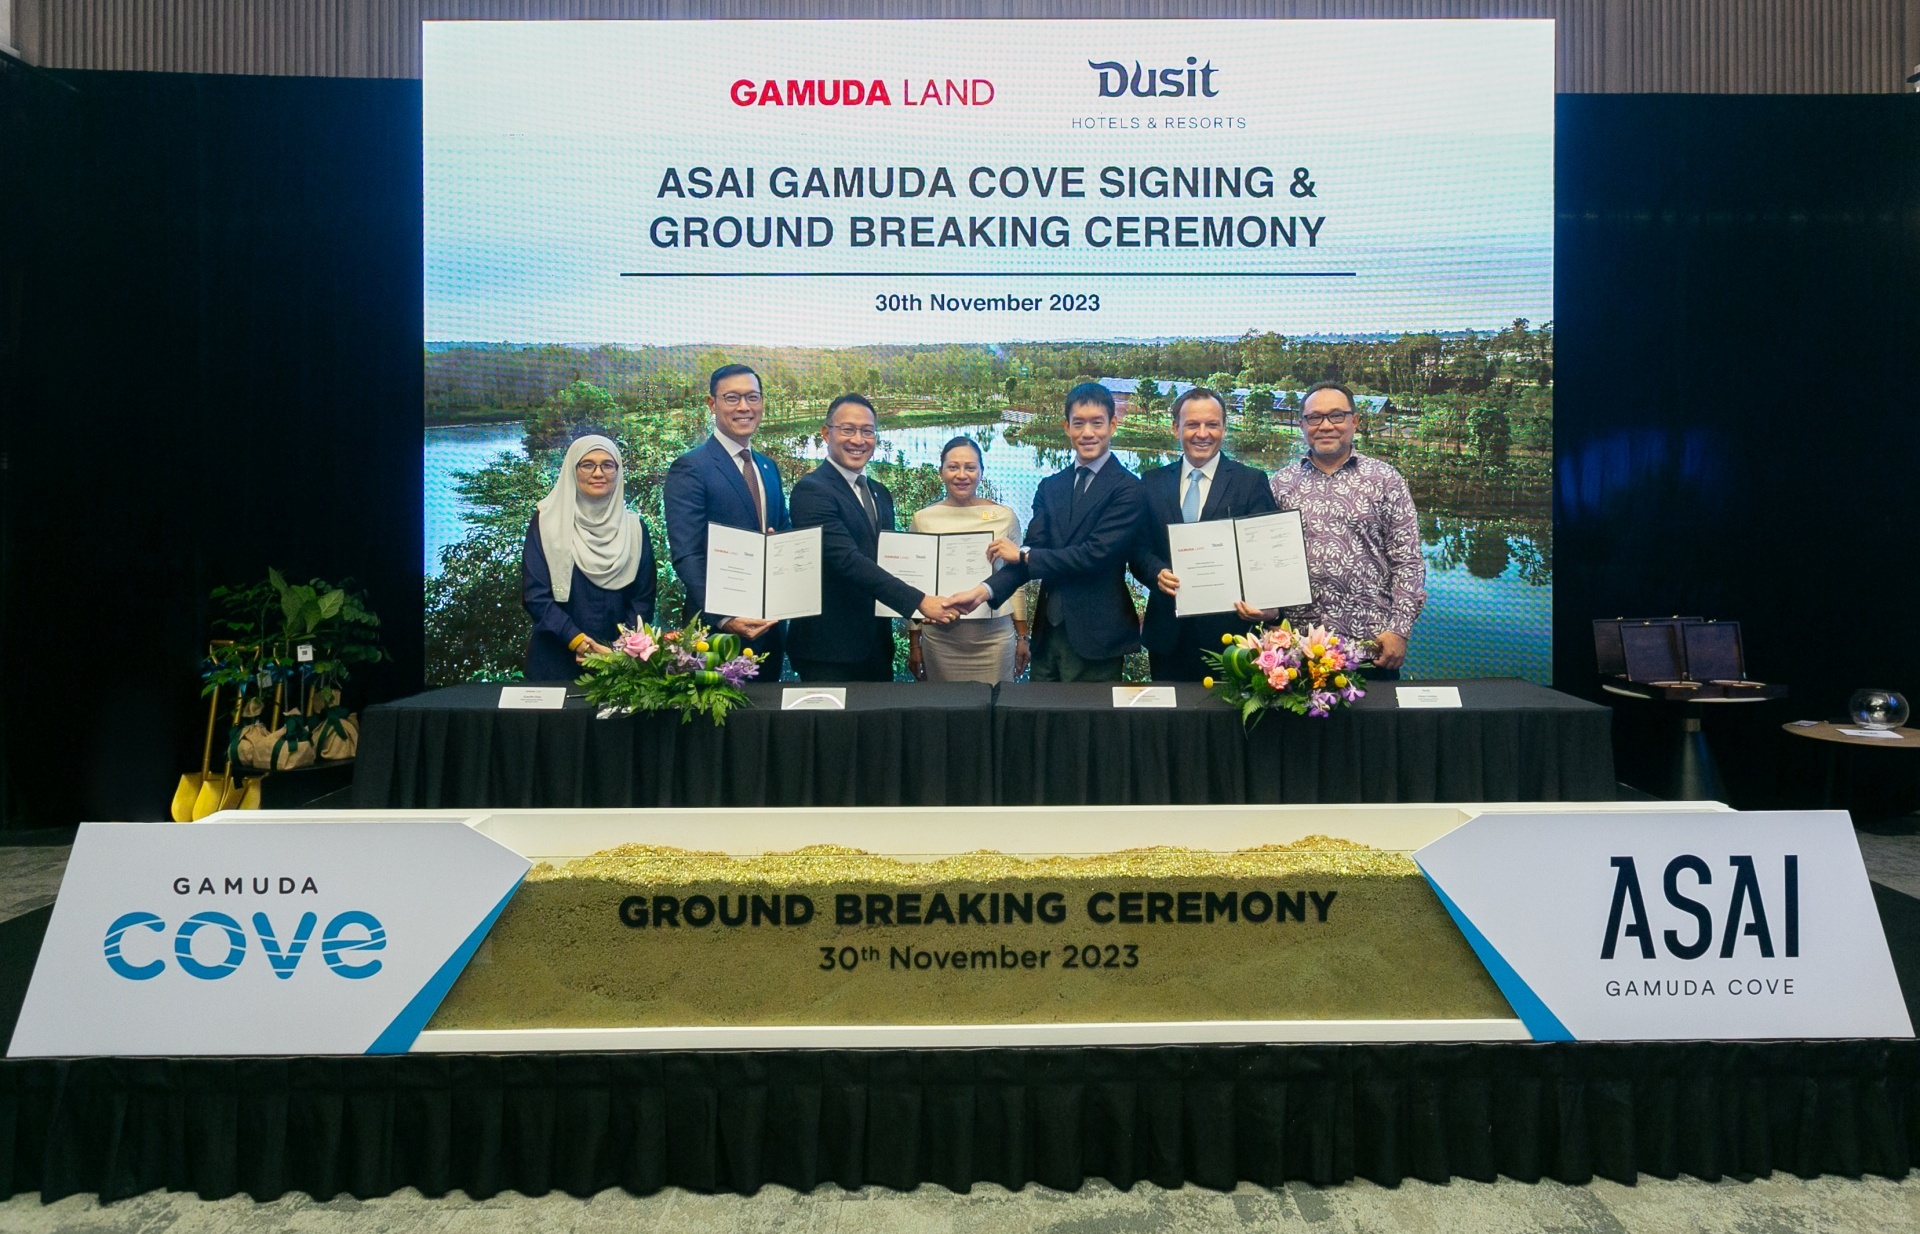 dusit hotels and resorts to manage asai gamuda cove in malaysia